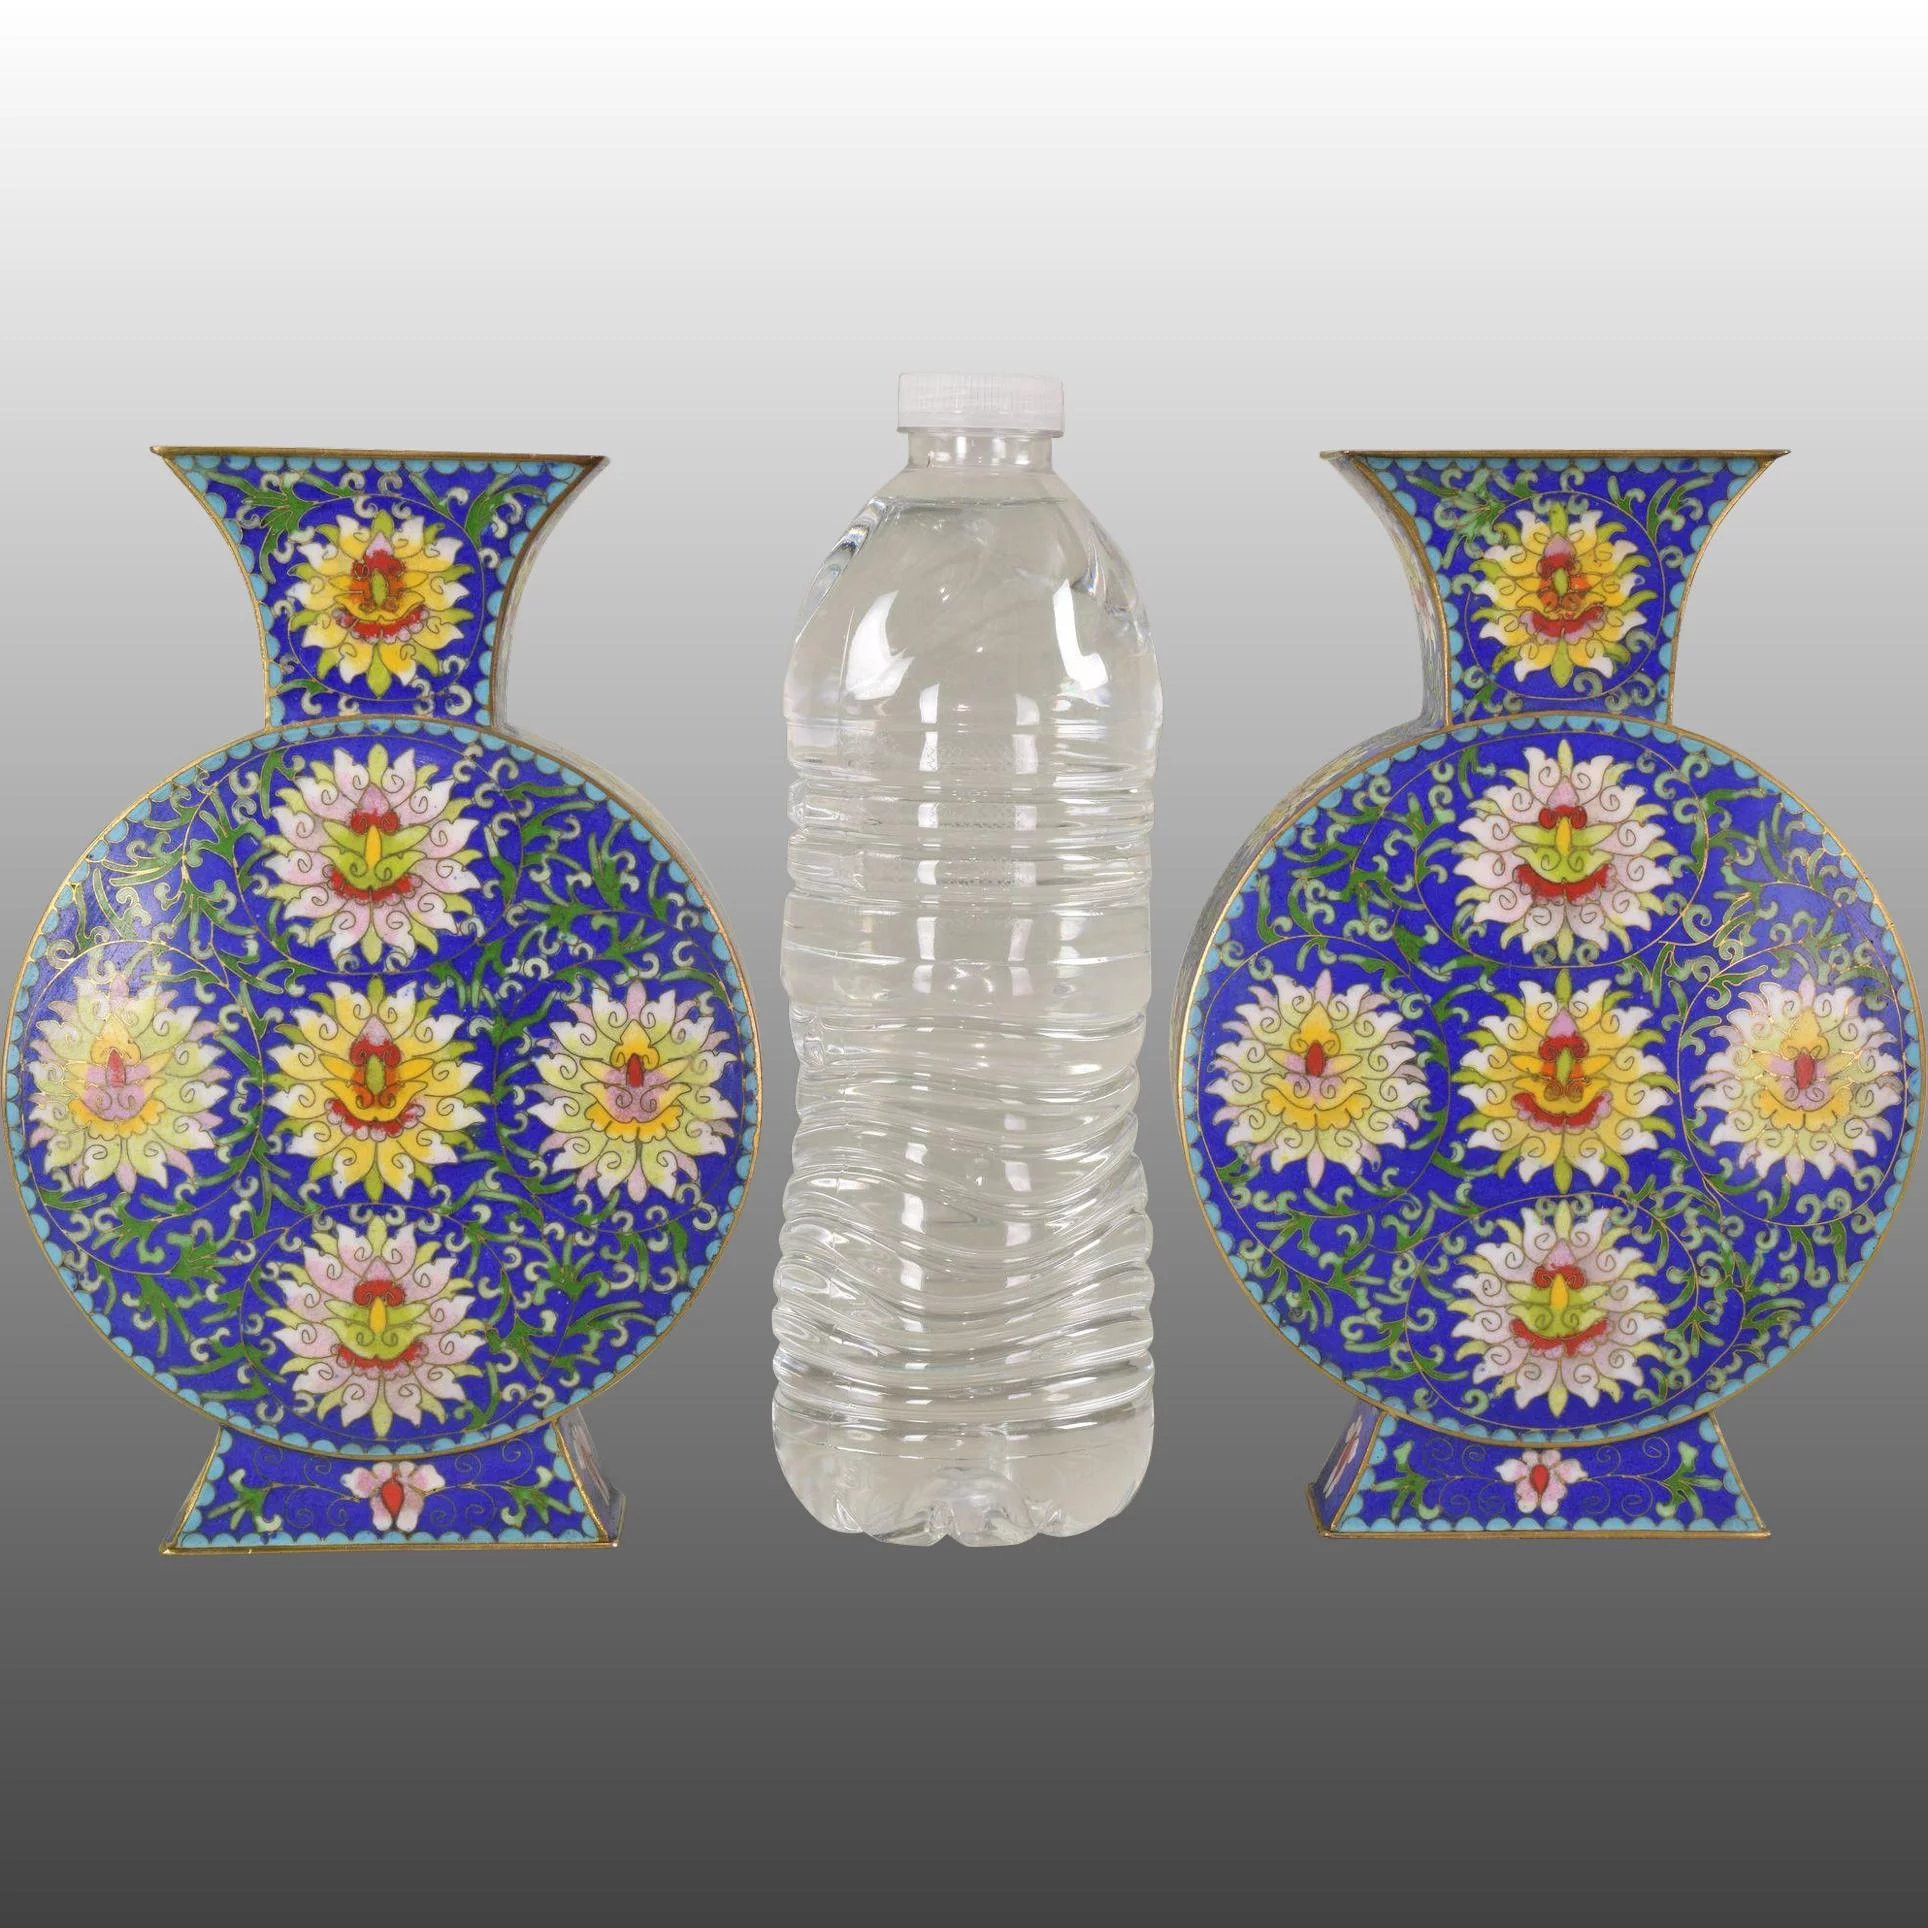 10 Wonderful Vintage Japanese Cloisonne Vase 2024 free download vintage japanese cloisonne vase of pair vintage petite blue cloisonne pillow type vases with yellow throughout click to expand